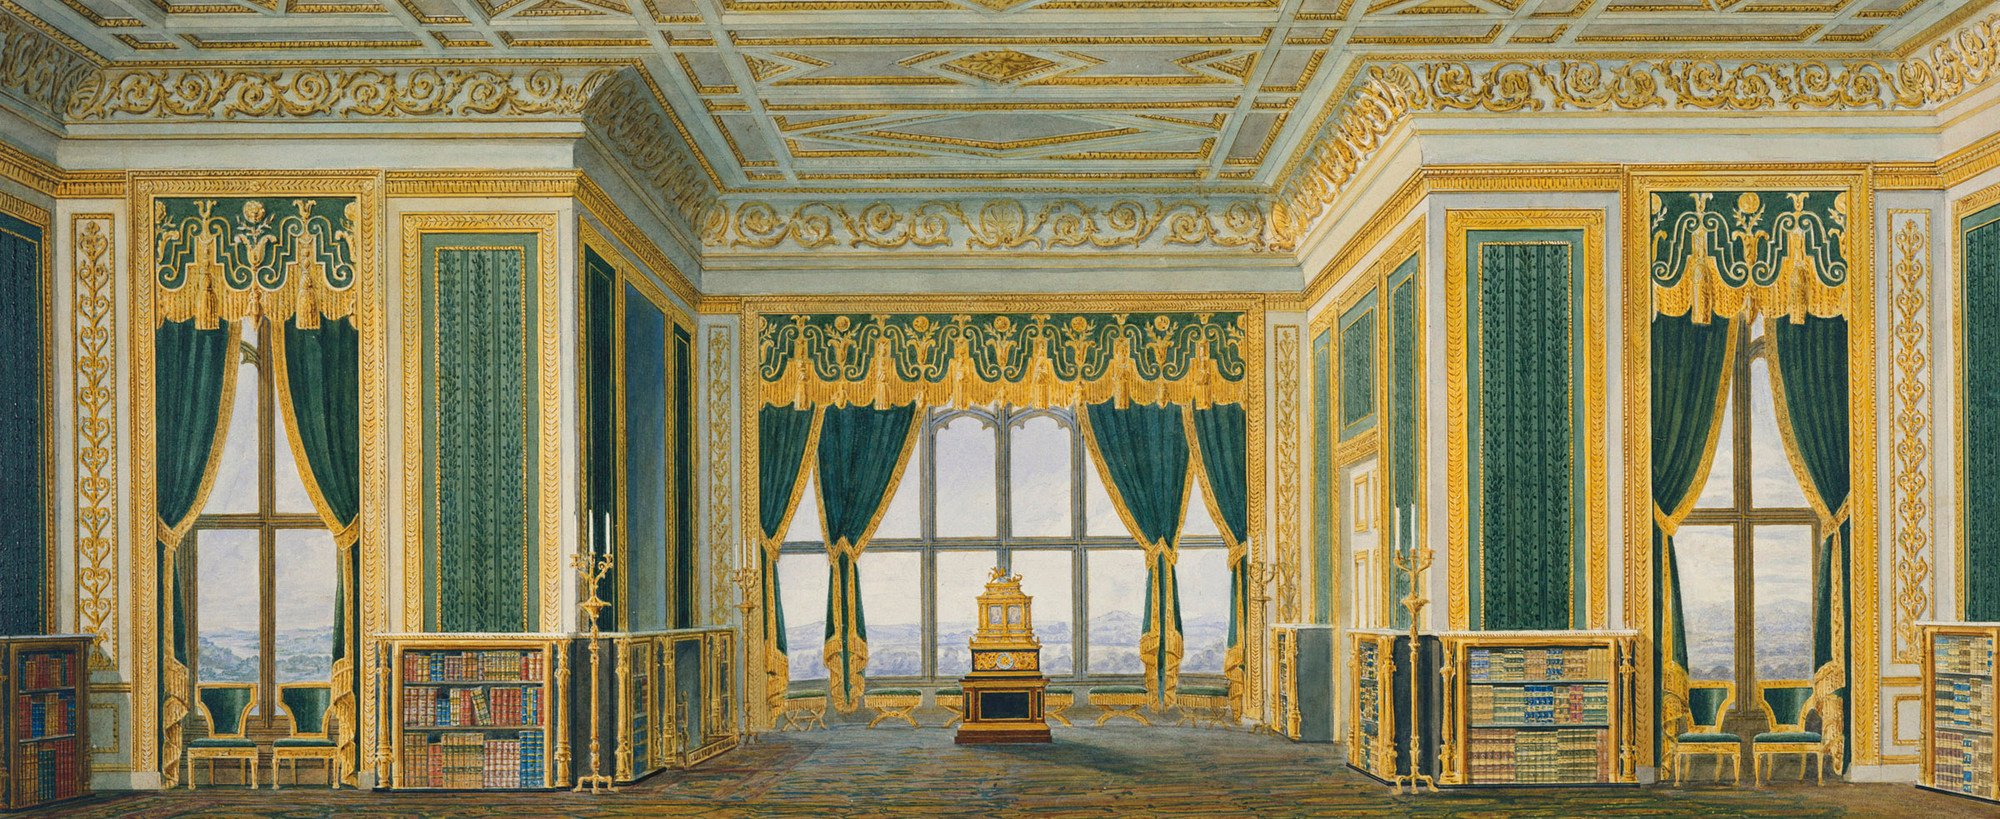 The furniture-makers Nicholas Morel and George Seddon went into partnership in 1826 to decorate George IV’s new Private Apartments in Windsor Castle. The firm produced a series of designs showing the principal elevations of each room, with the intended 